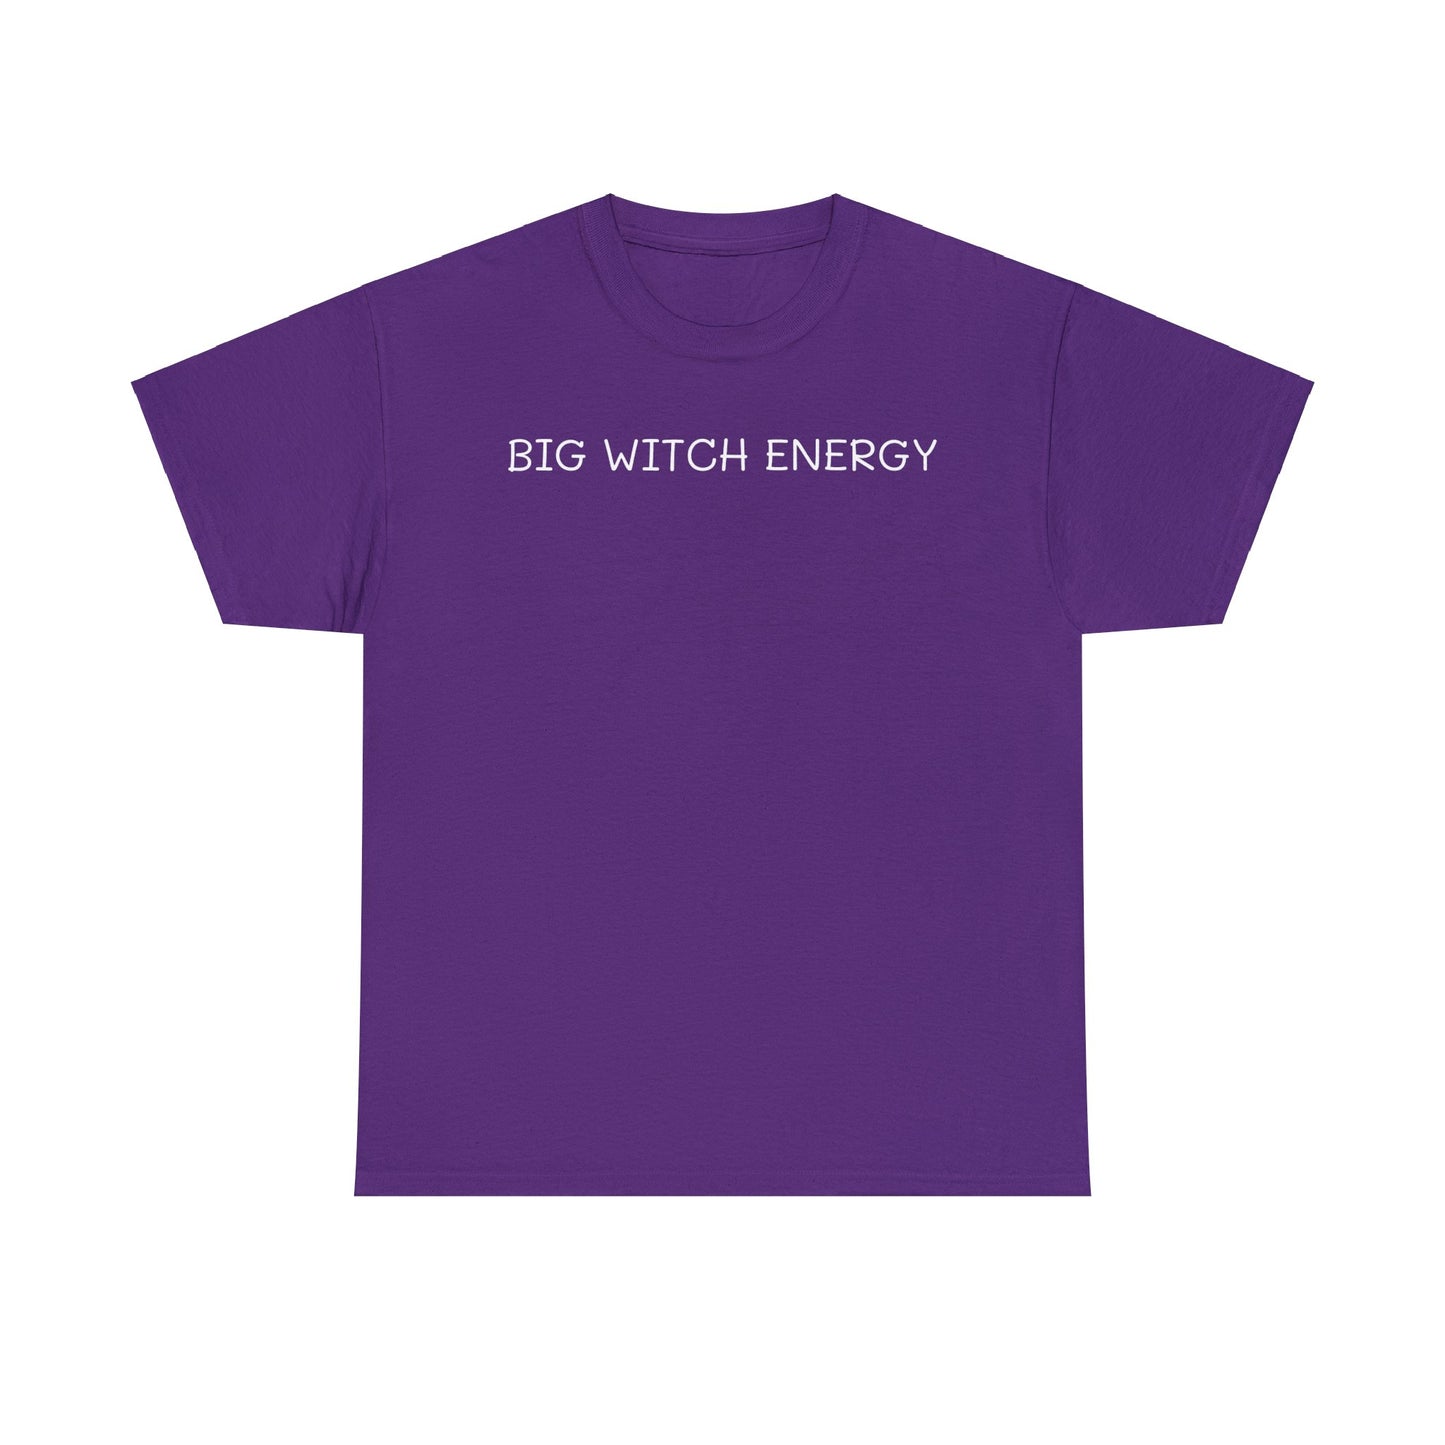 Big Witch Energy cotton t-shirt